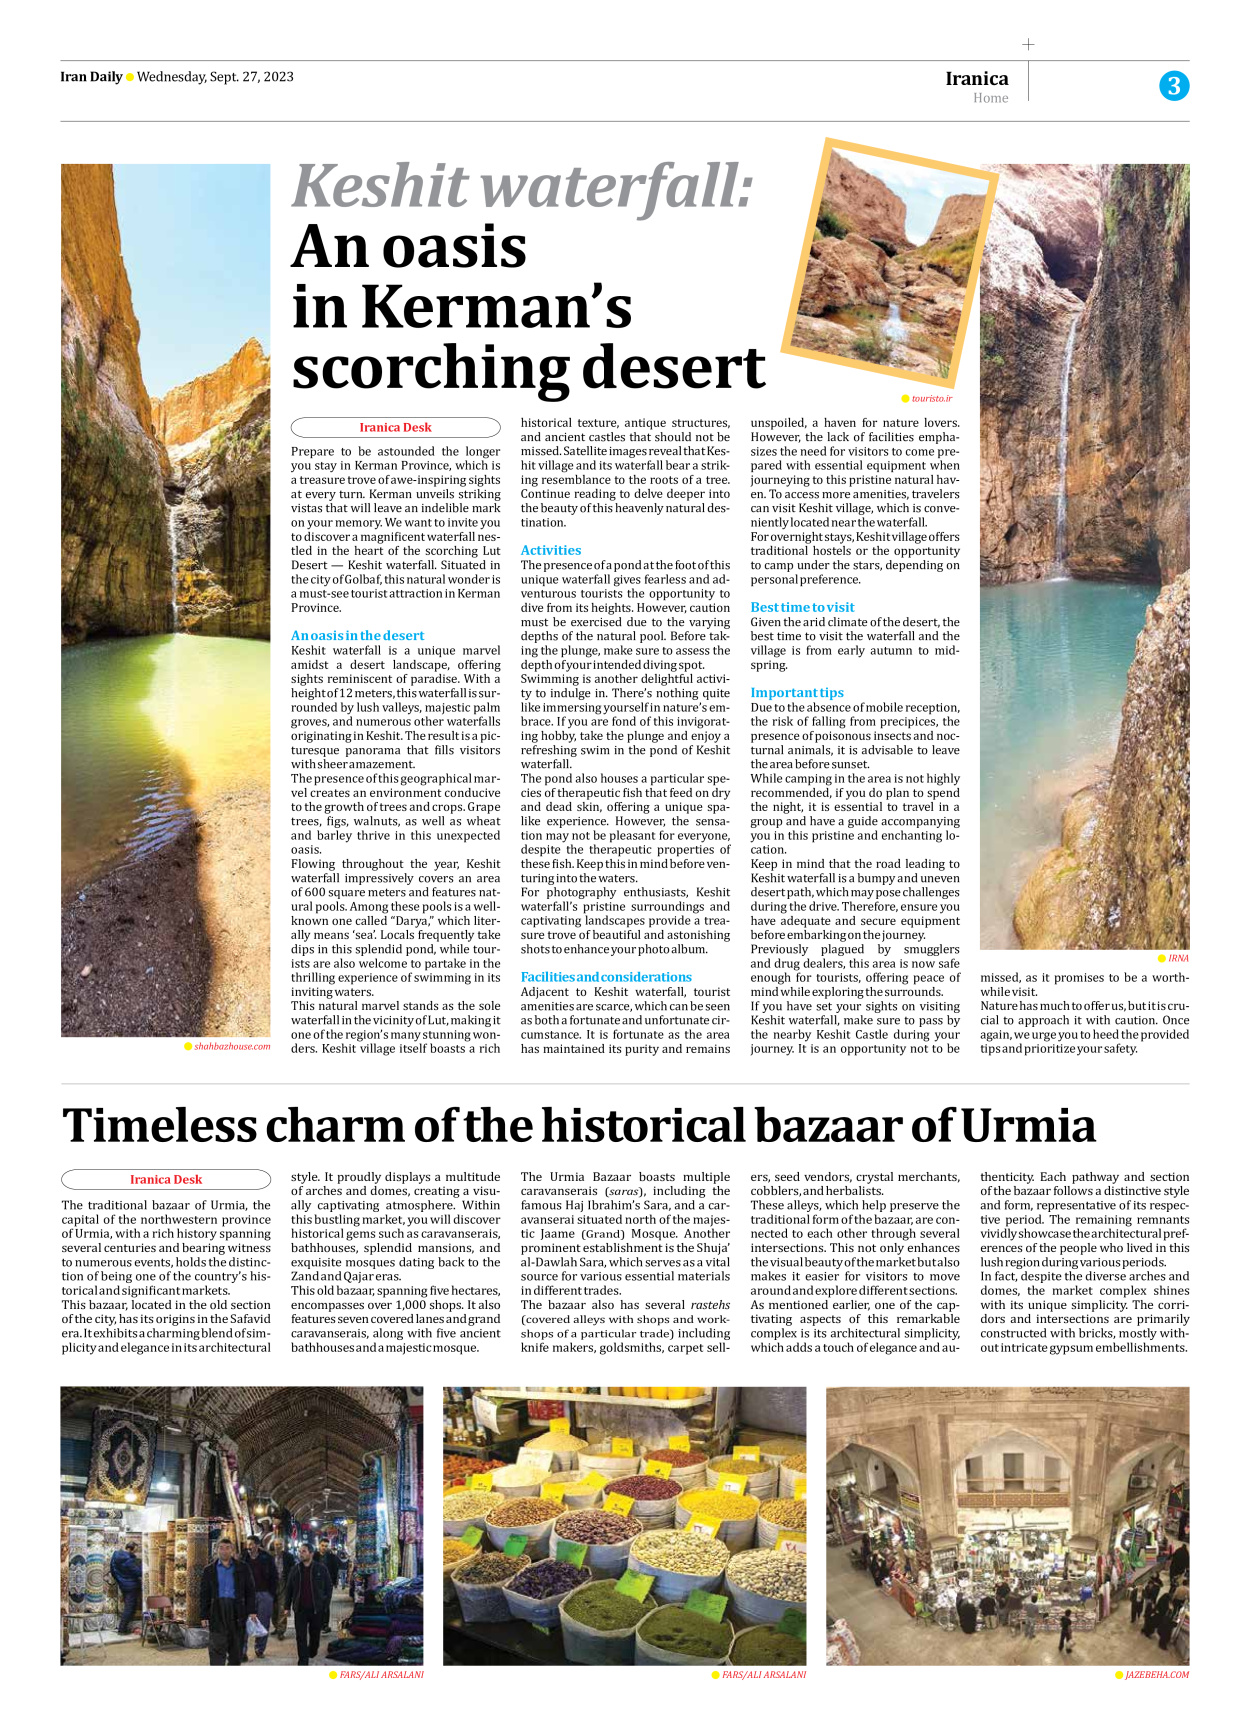 Iran Daily - Number Seven Thousand Three Hundred and Ninety Four - 27 September 2023 - Page 3